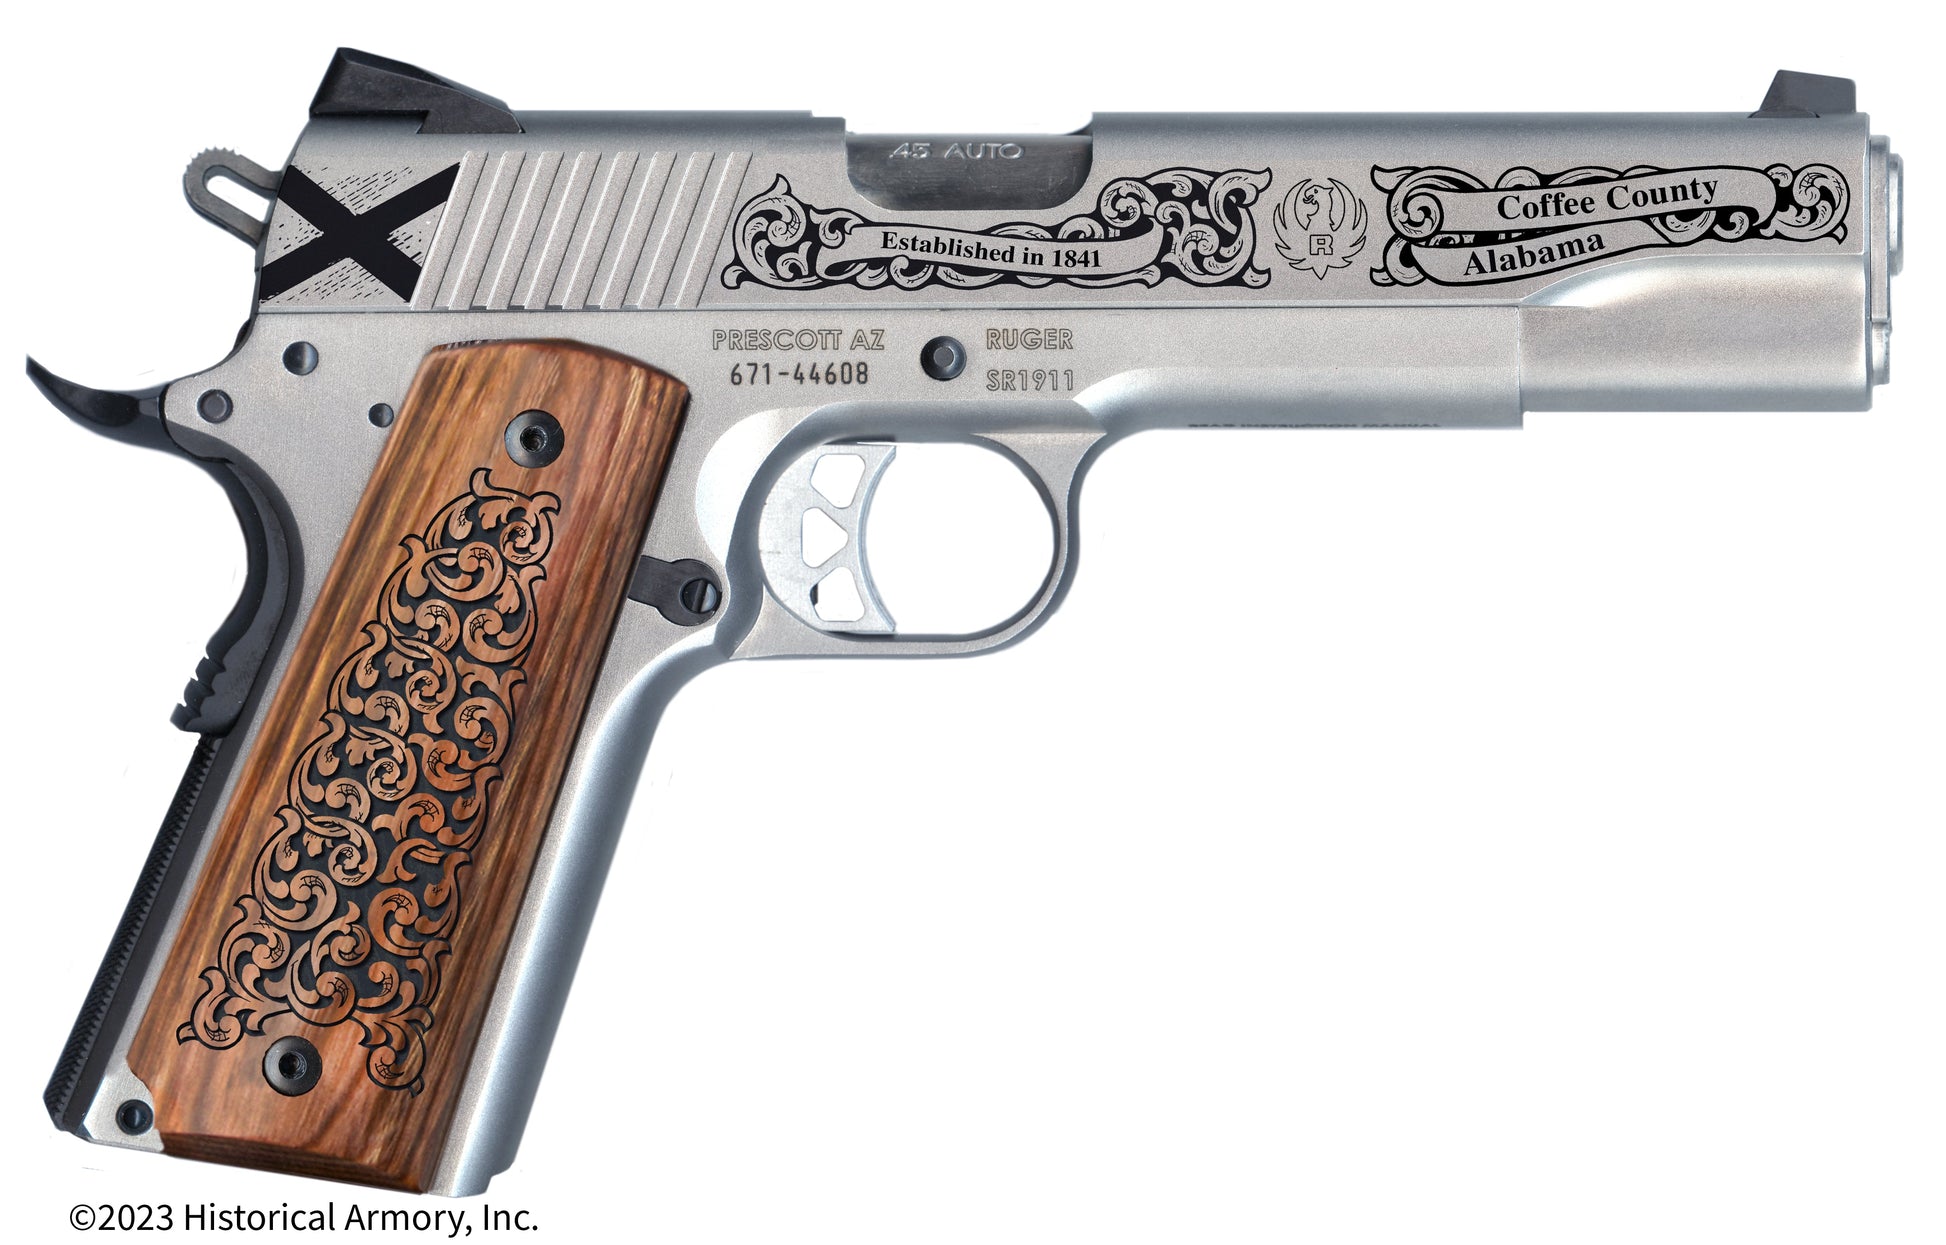 Coffee  County Alabama Engraved .45 Auto Ruger 1911